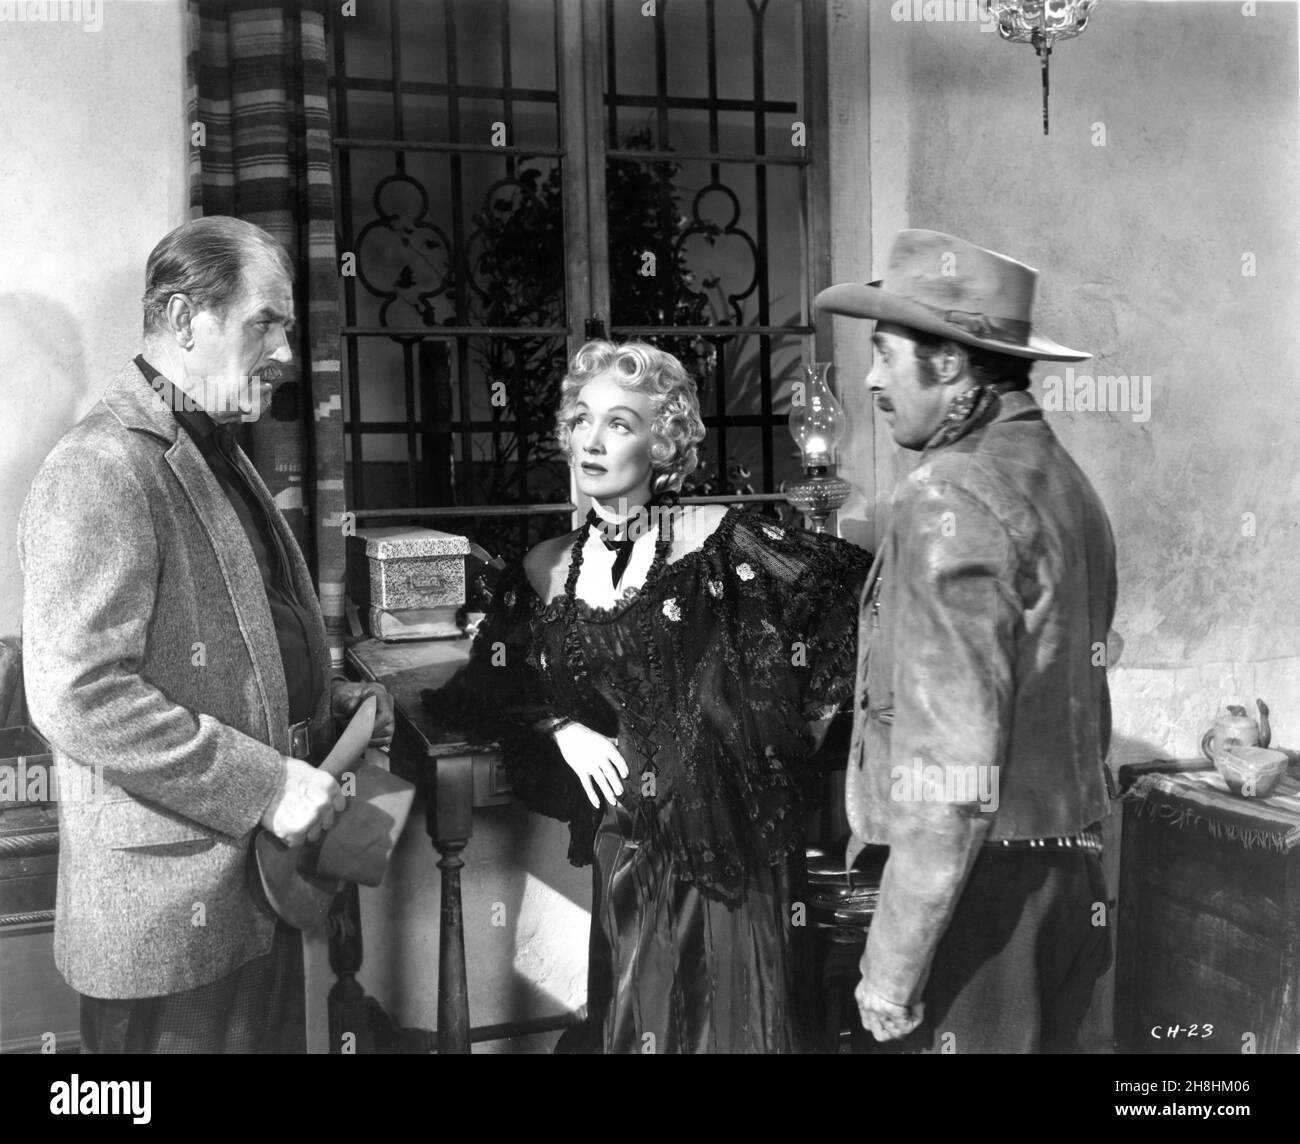 MARLENE DIETRICH in RANCHO NOTORIOUS 1952 director FRITZ LANG original story Silvia Richards screenplay Daniel Taradash wardrobe design for Miss Dietrich Don Loper Fidelity Pictures Corporation / RKO Radio Pictures Stock Photo